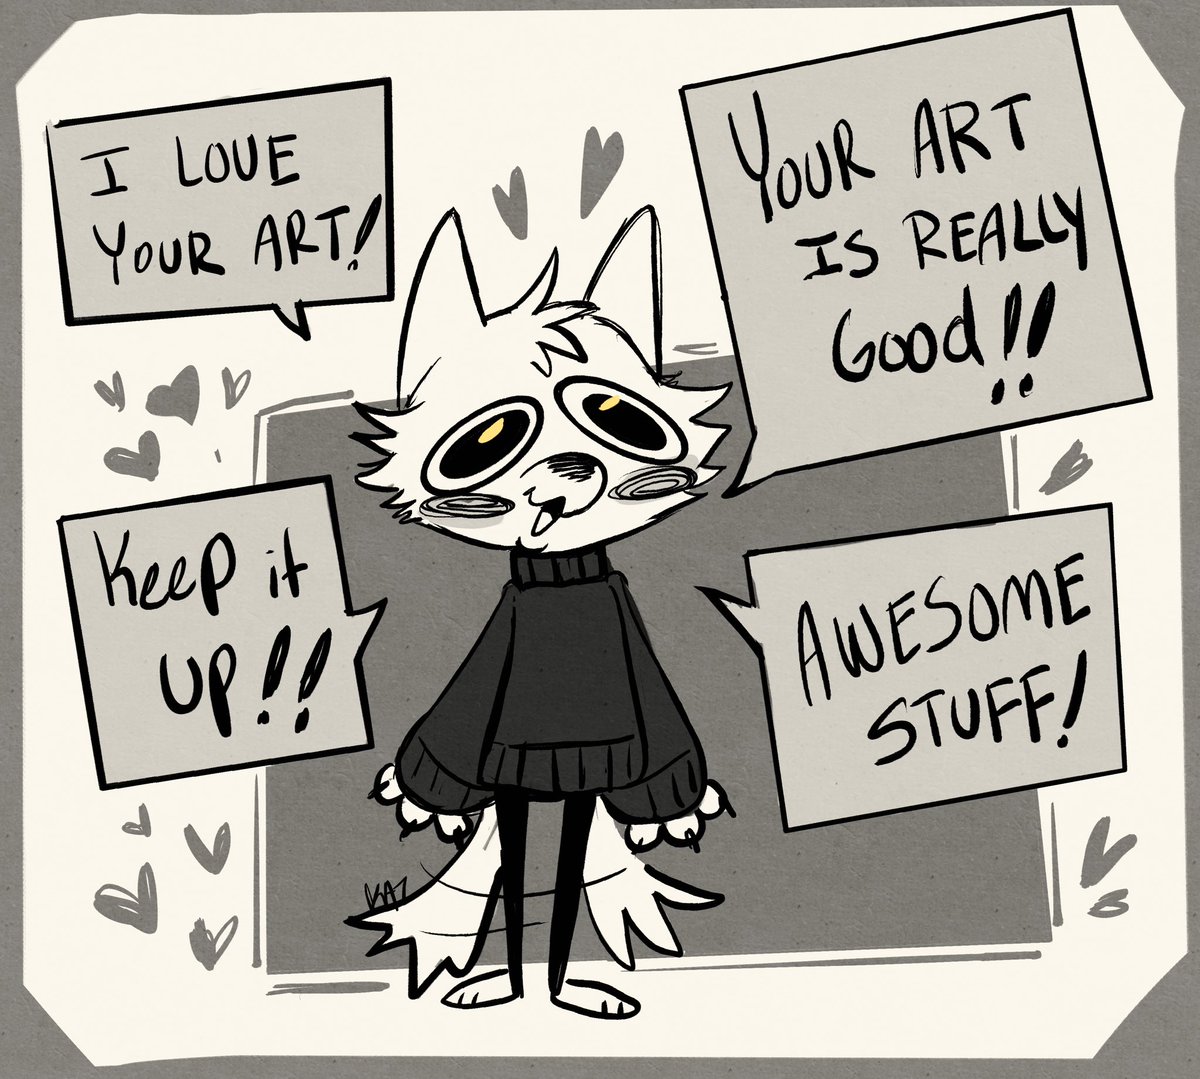 Art is hard, you’re doing great ⭐️